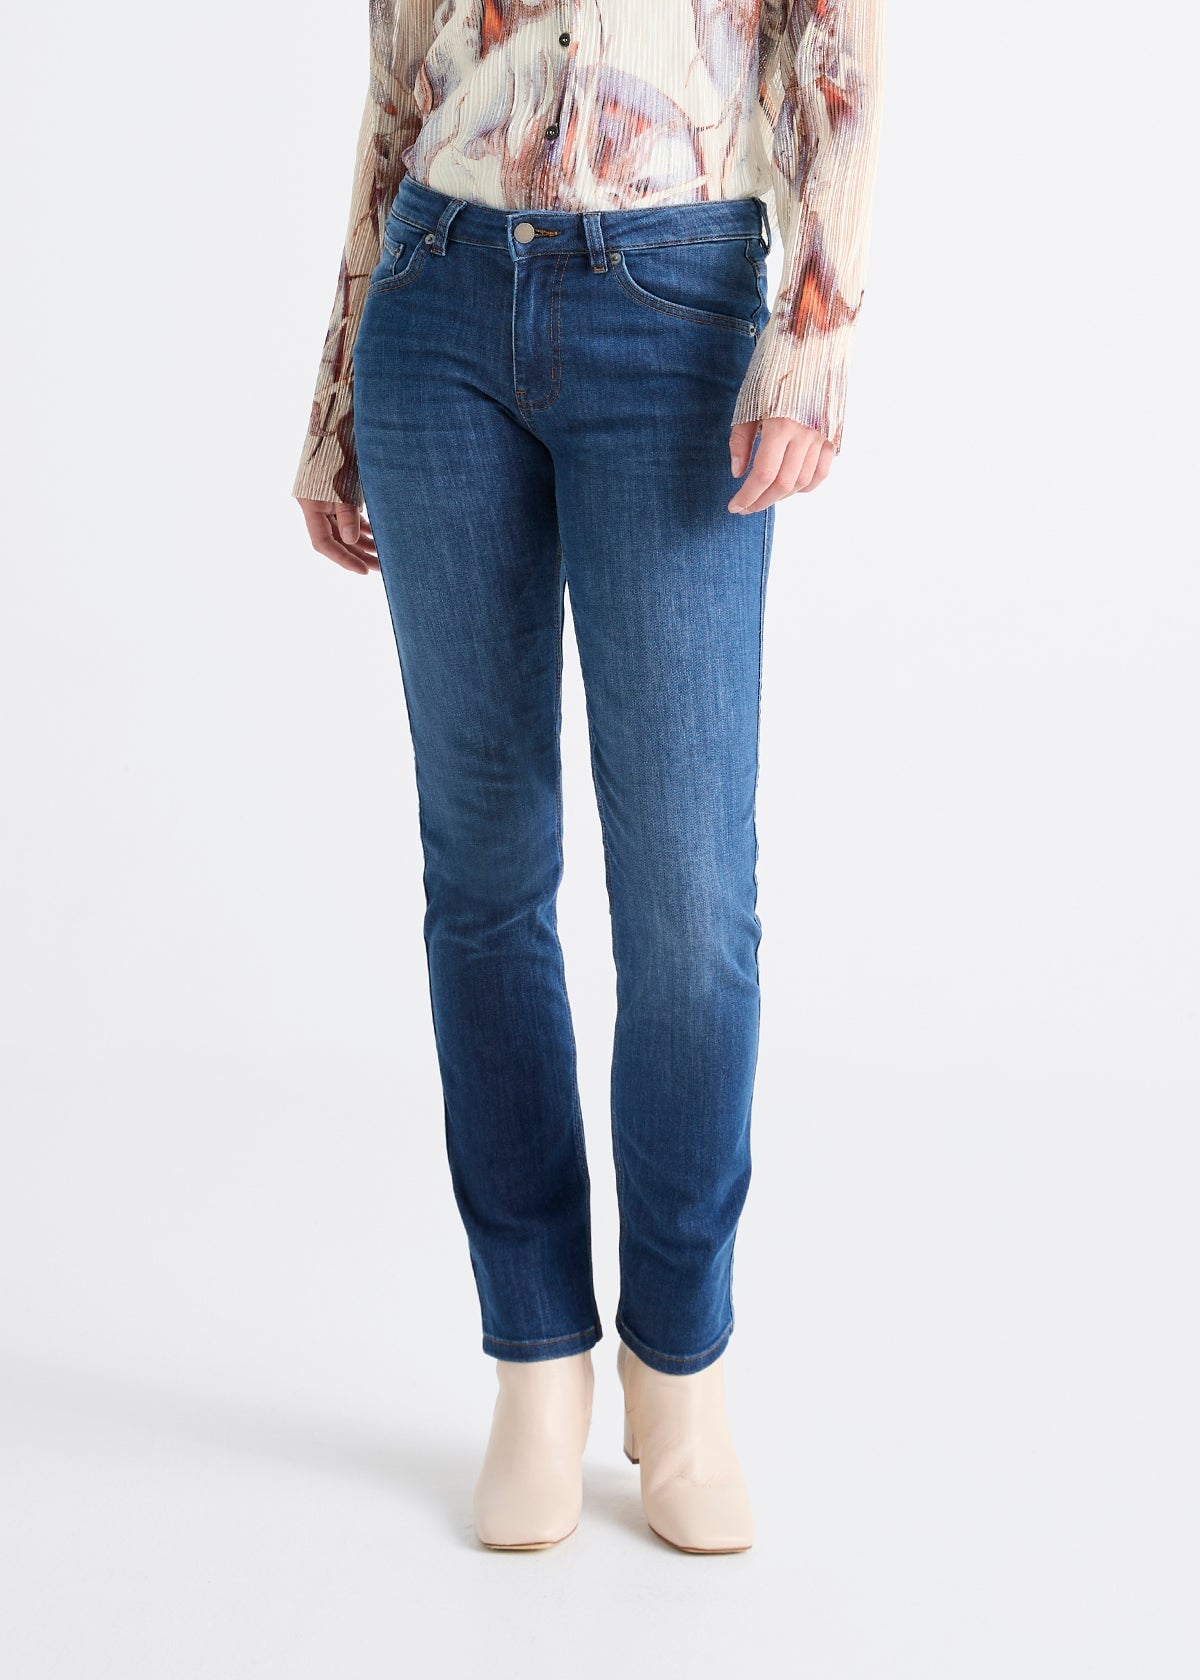 Midweight Denim High Rise Arc (Button Fly) - Vintage Tint